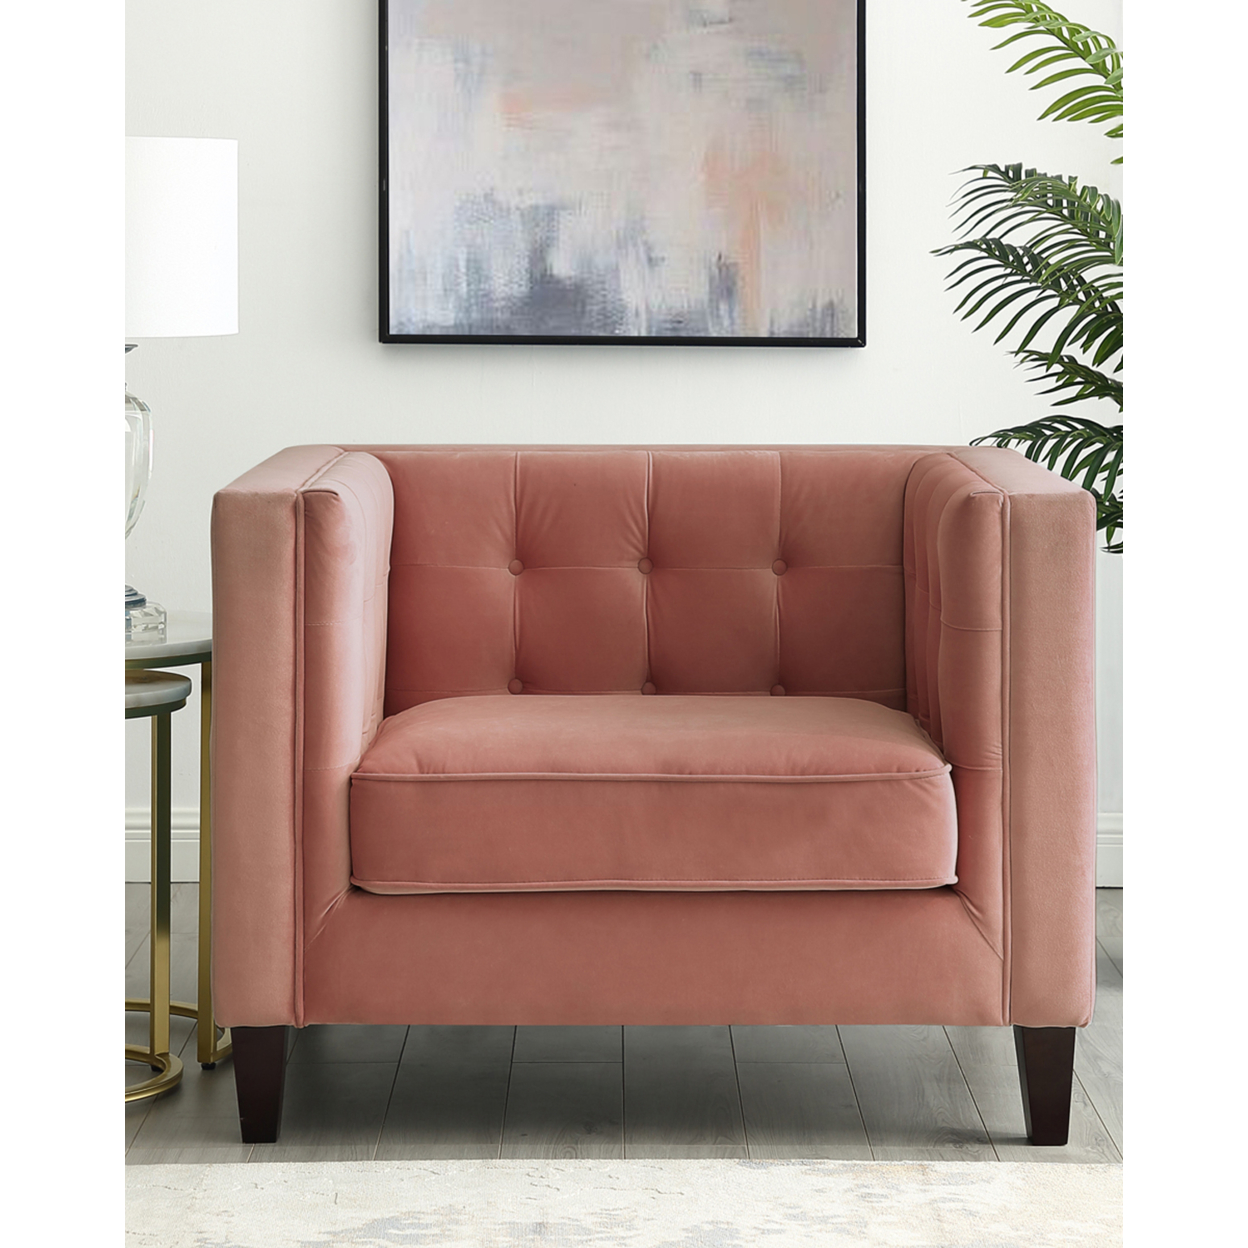 Pax Velvet Button Tufted Club Chair-Espresso Tapered Legs-Square Arms-By Inspired Home - Blush